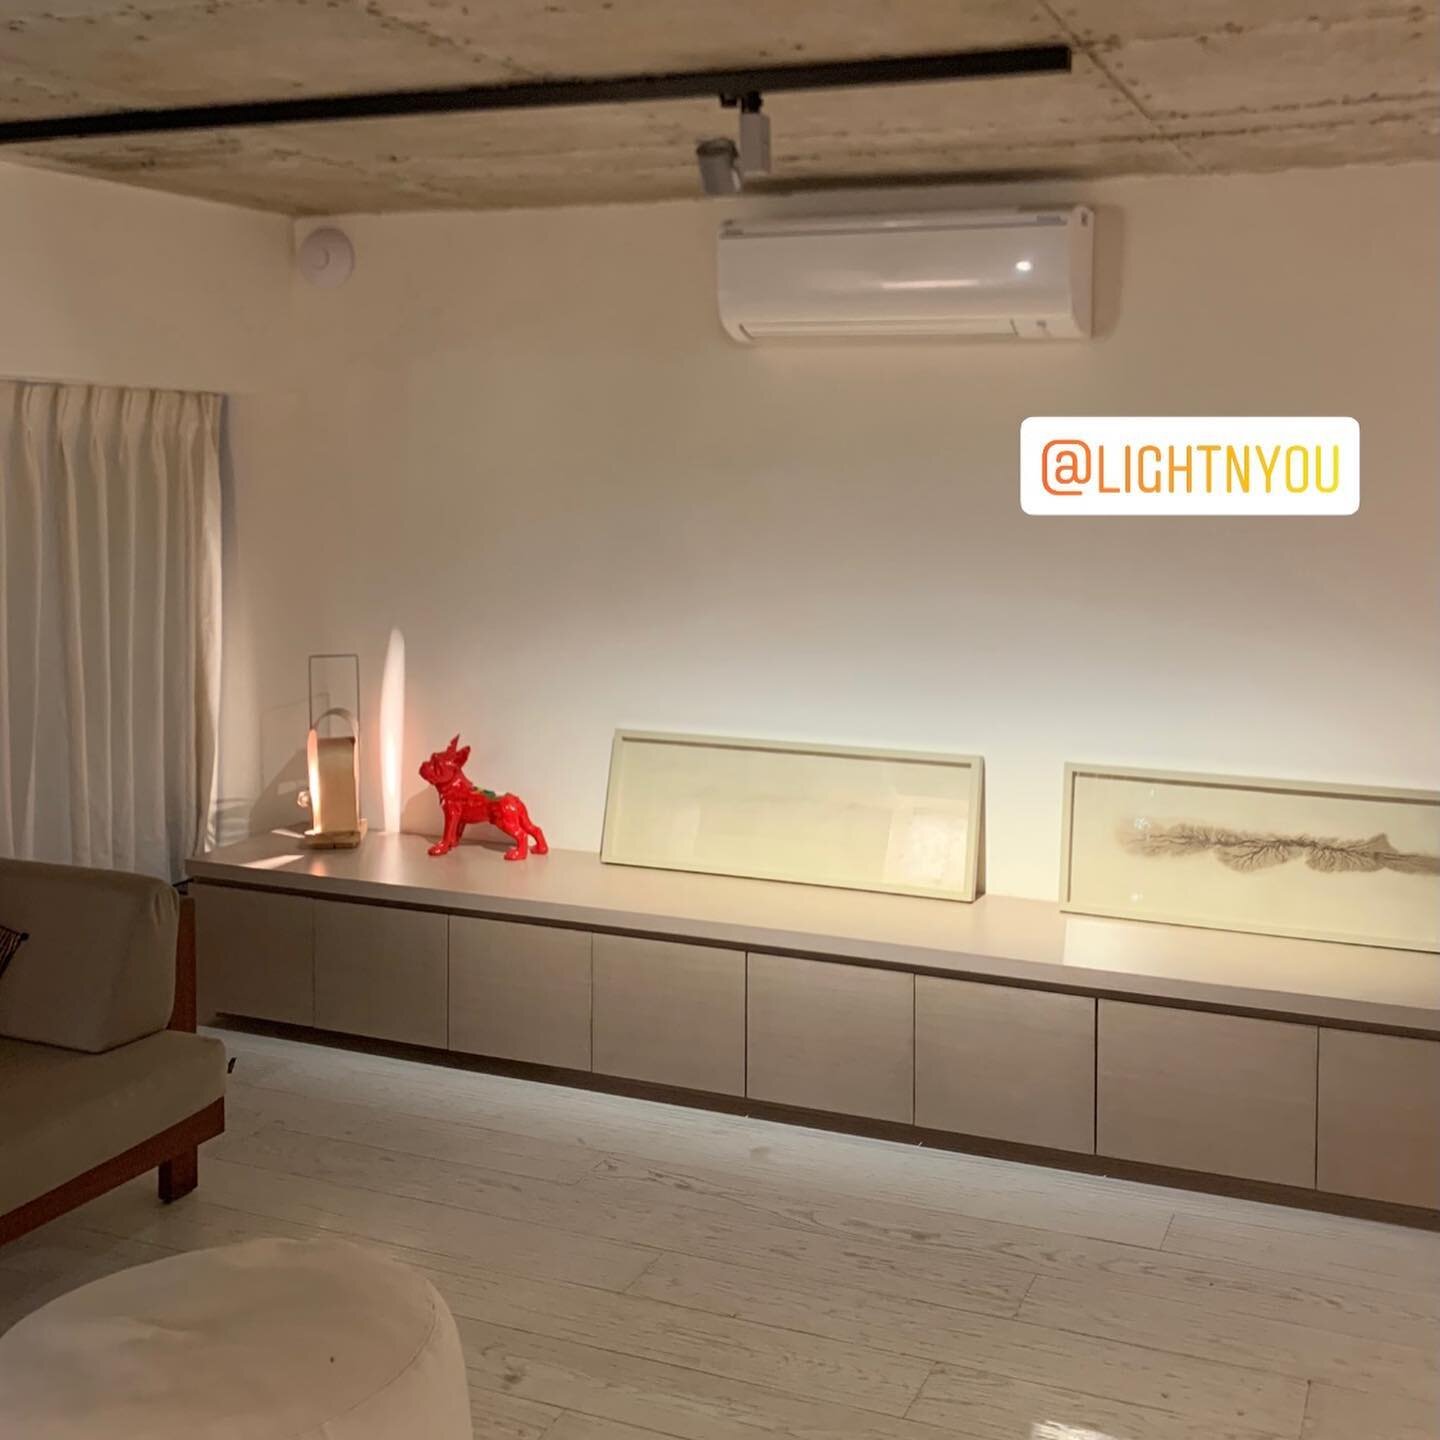 Promoting architectural lighting in Hotel Rooms and Suites | @lightnyou 
.....
Architecture &amp; Design Advisor @ankay.design 
Ar. Raghu Khurana is also the vice chairman at AIFACS (All India Fine Arts and Crafts Society) He mentions during exhibiti